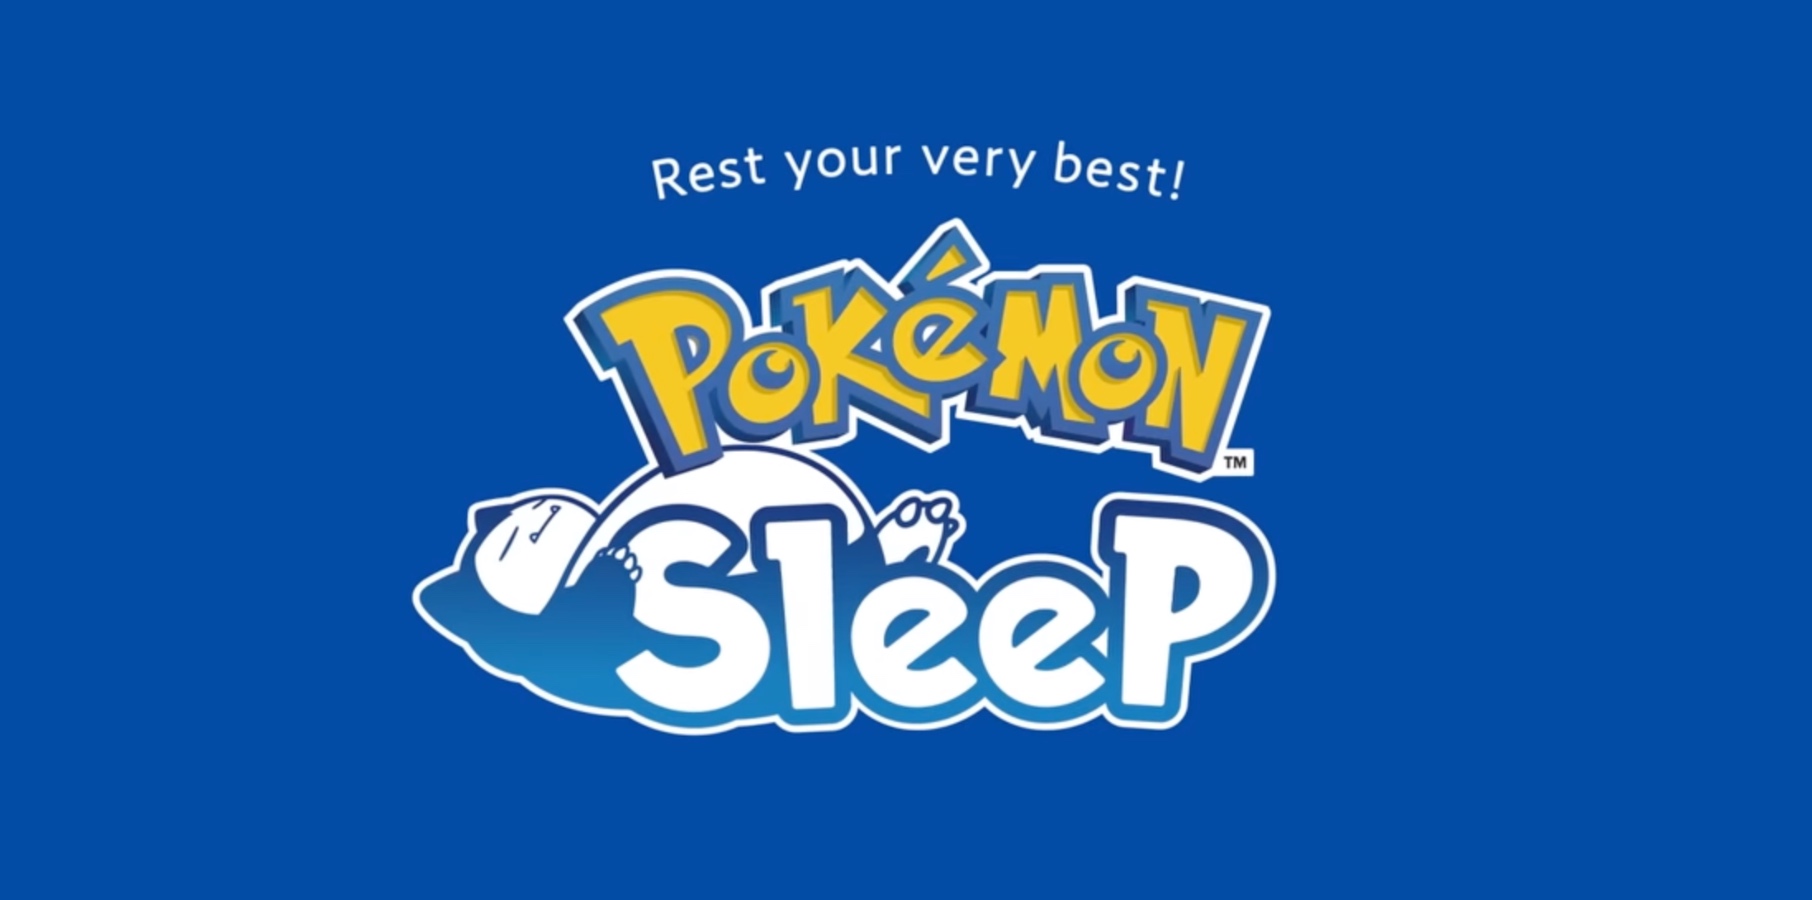 Launching soon, Pokemon Sleep could be a nightmare for mobile players